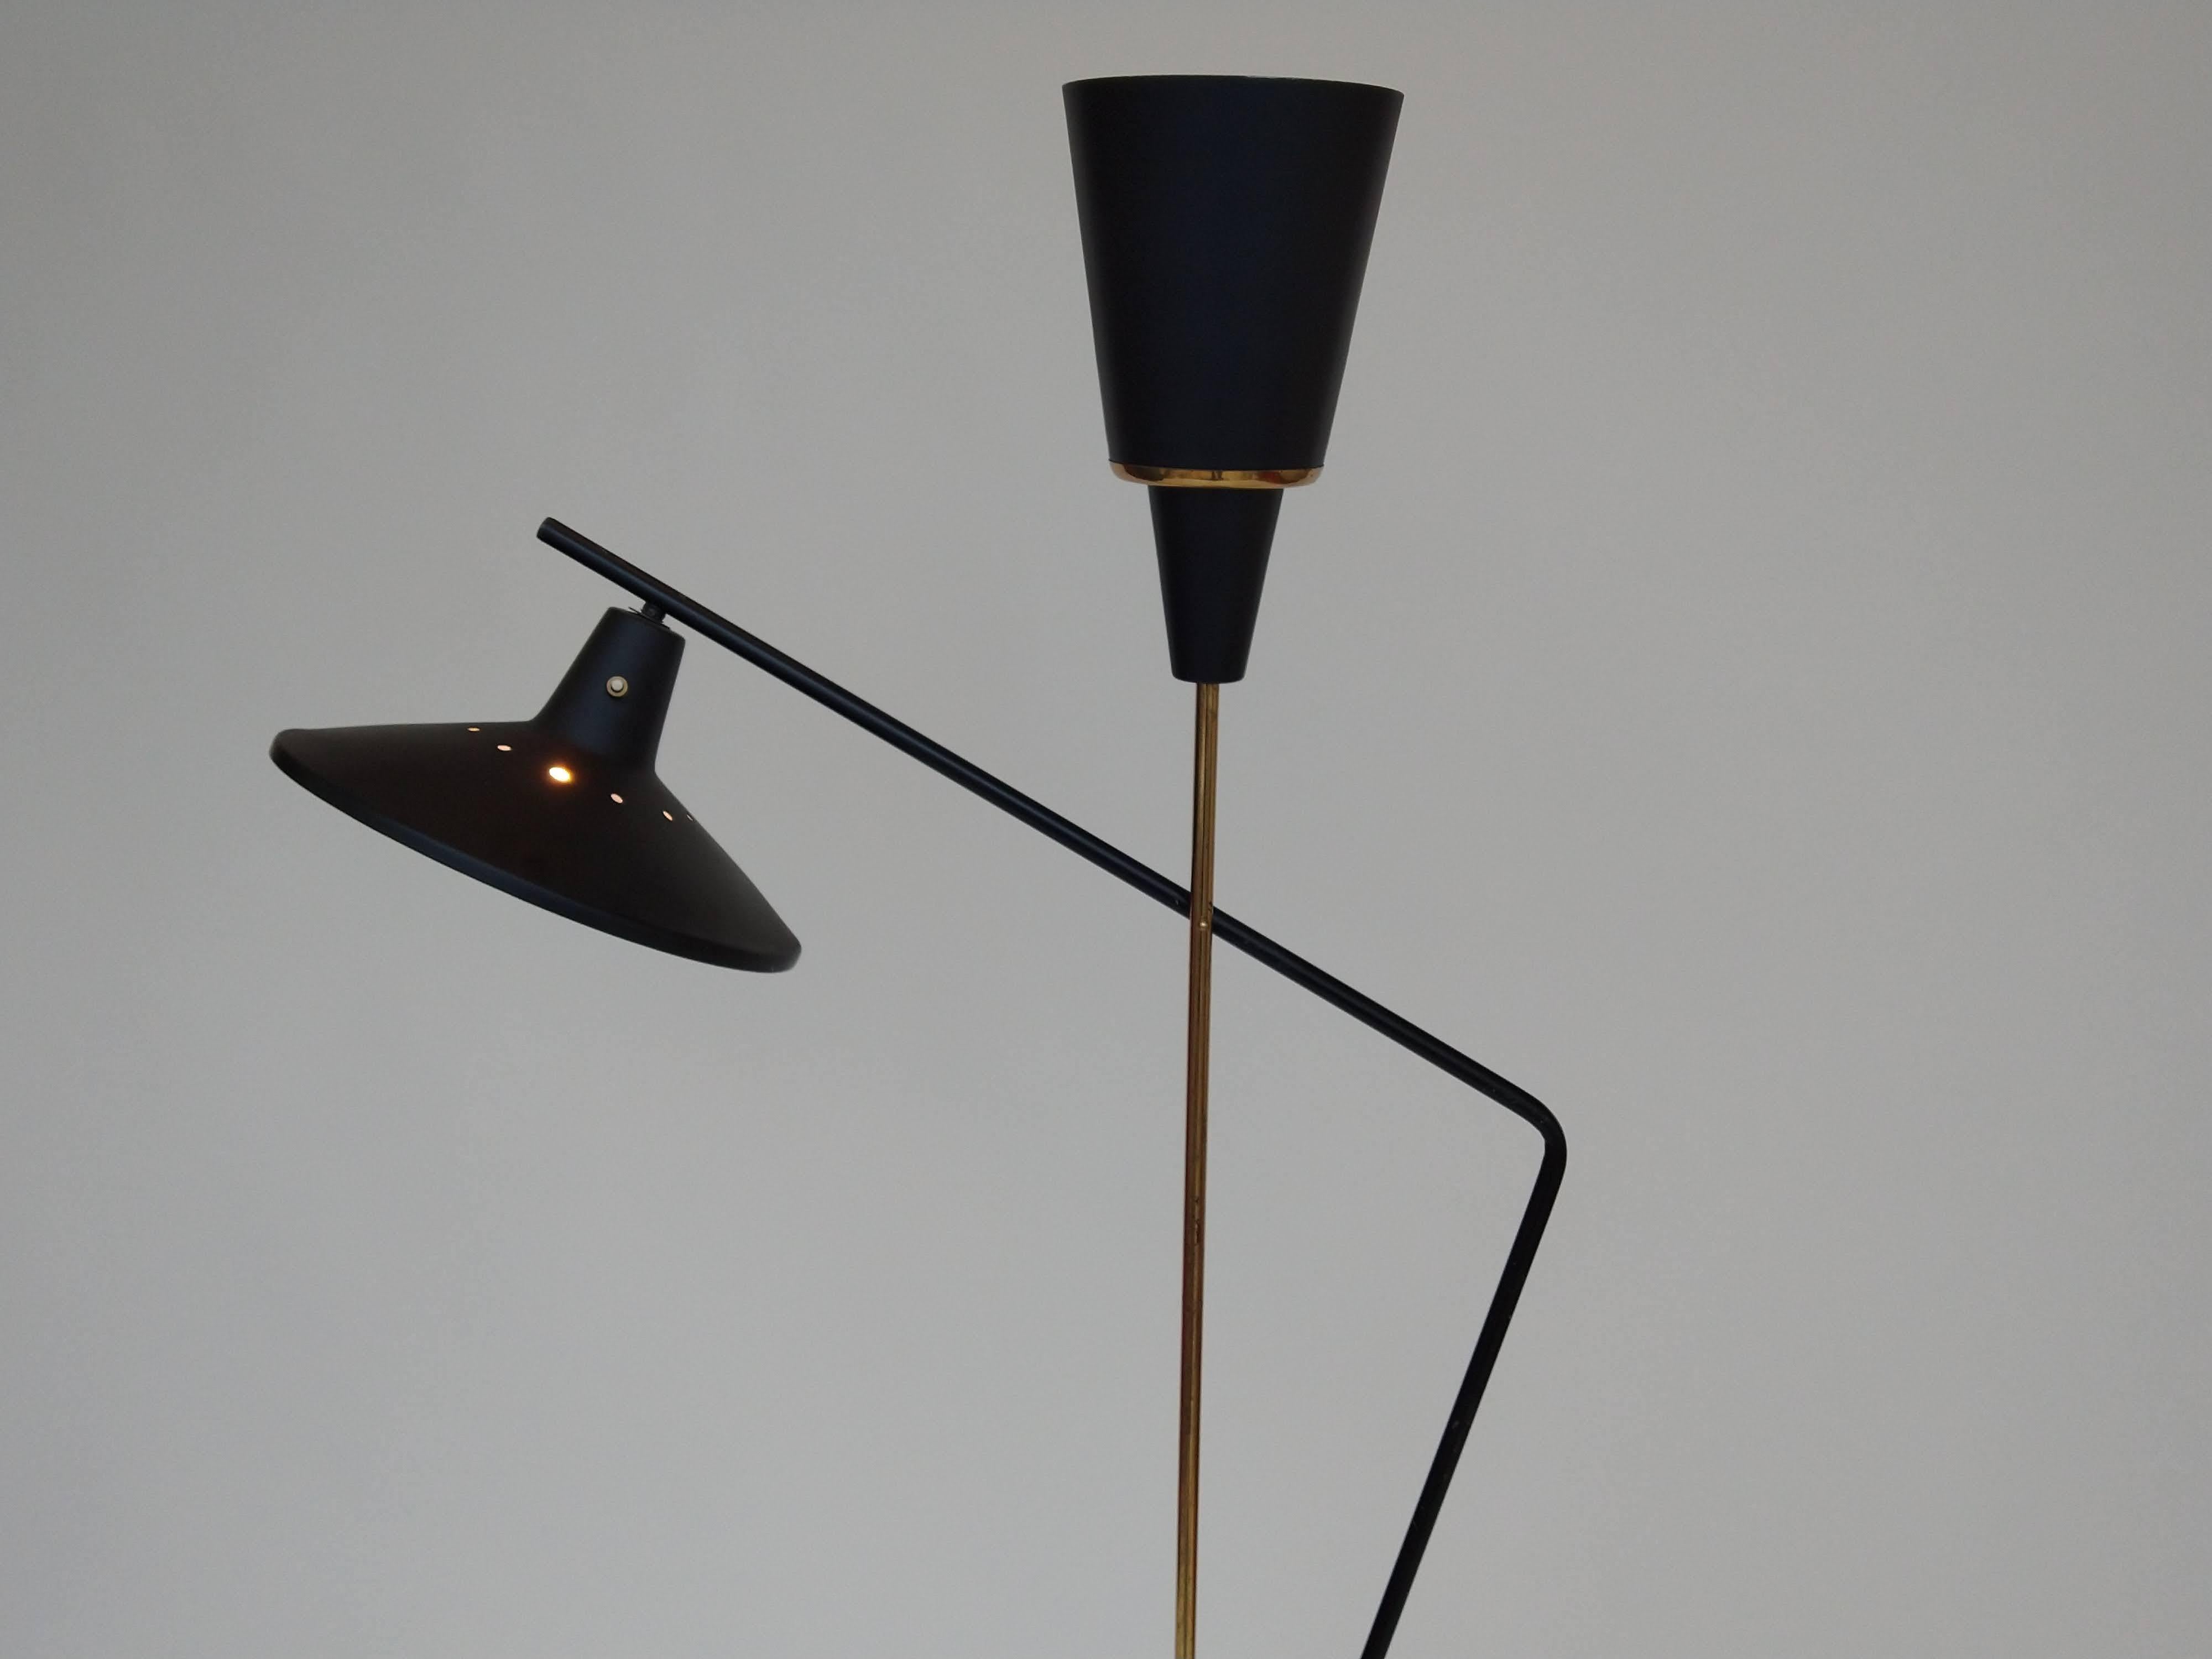 A striking brass and black-painted steel floor lamp attributed to a design by Gilardi & Barzaghi, Italy, circa 1950. Sitting on a Carrara marble base, the lamps double stem supports two black-painted aluminium diffusers, one an uplighter, the other